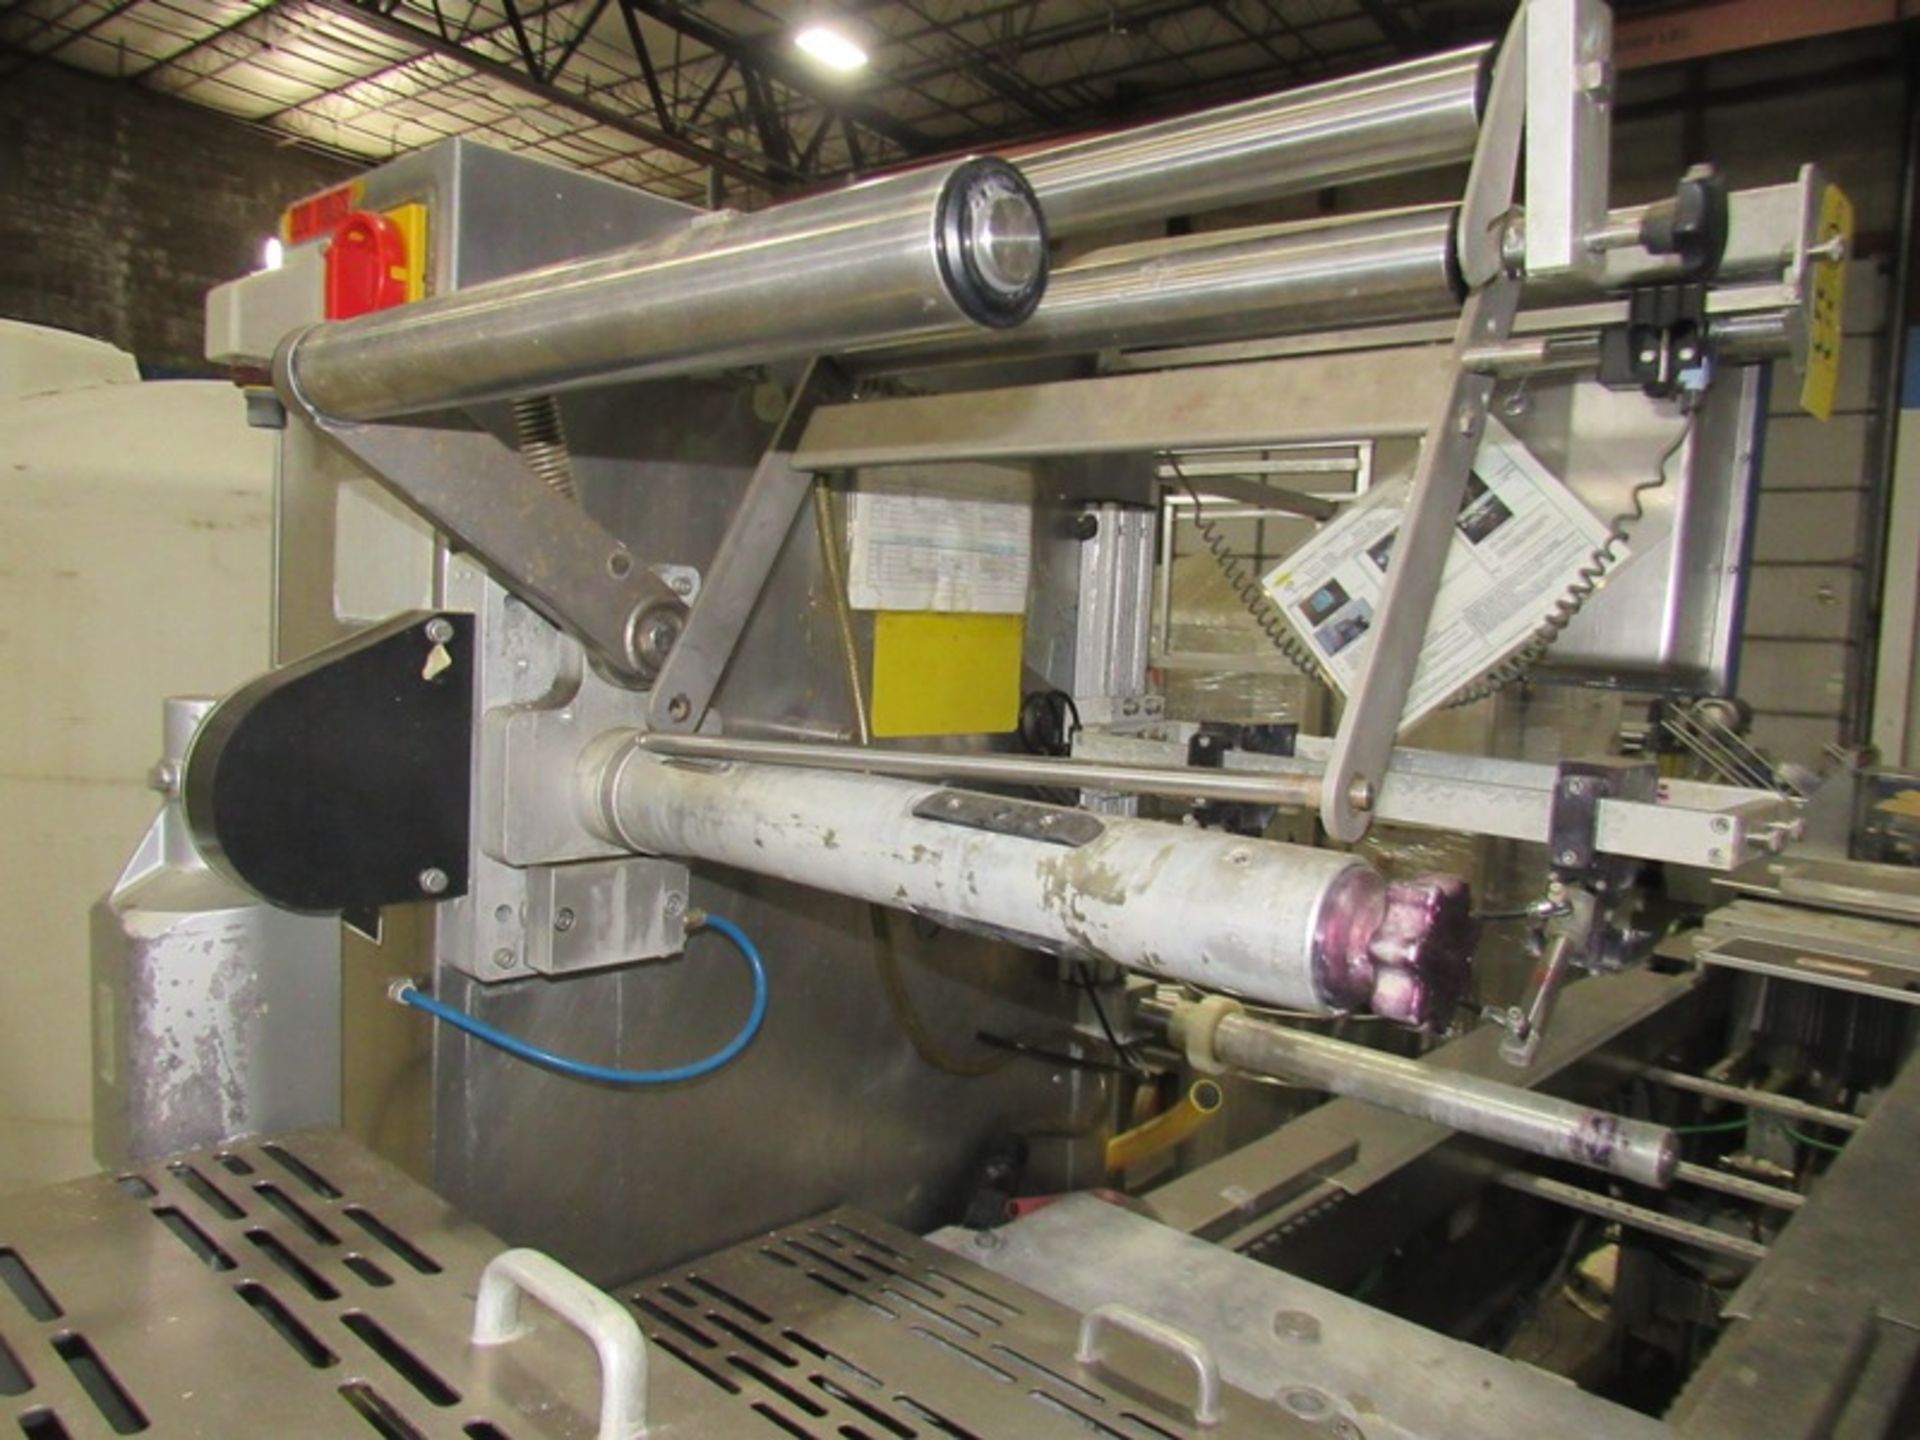 Multivac Rollstock Thermoformer Packaging Machine, 16 5/8" between chains, approx. 13 1/2" - Image 9 of 25